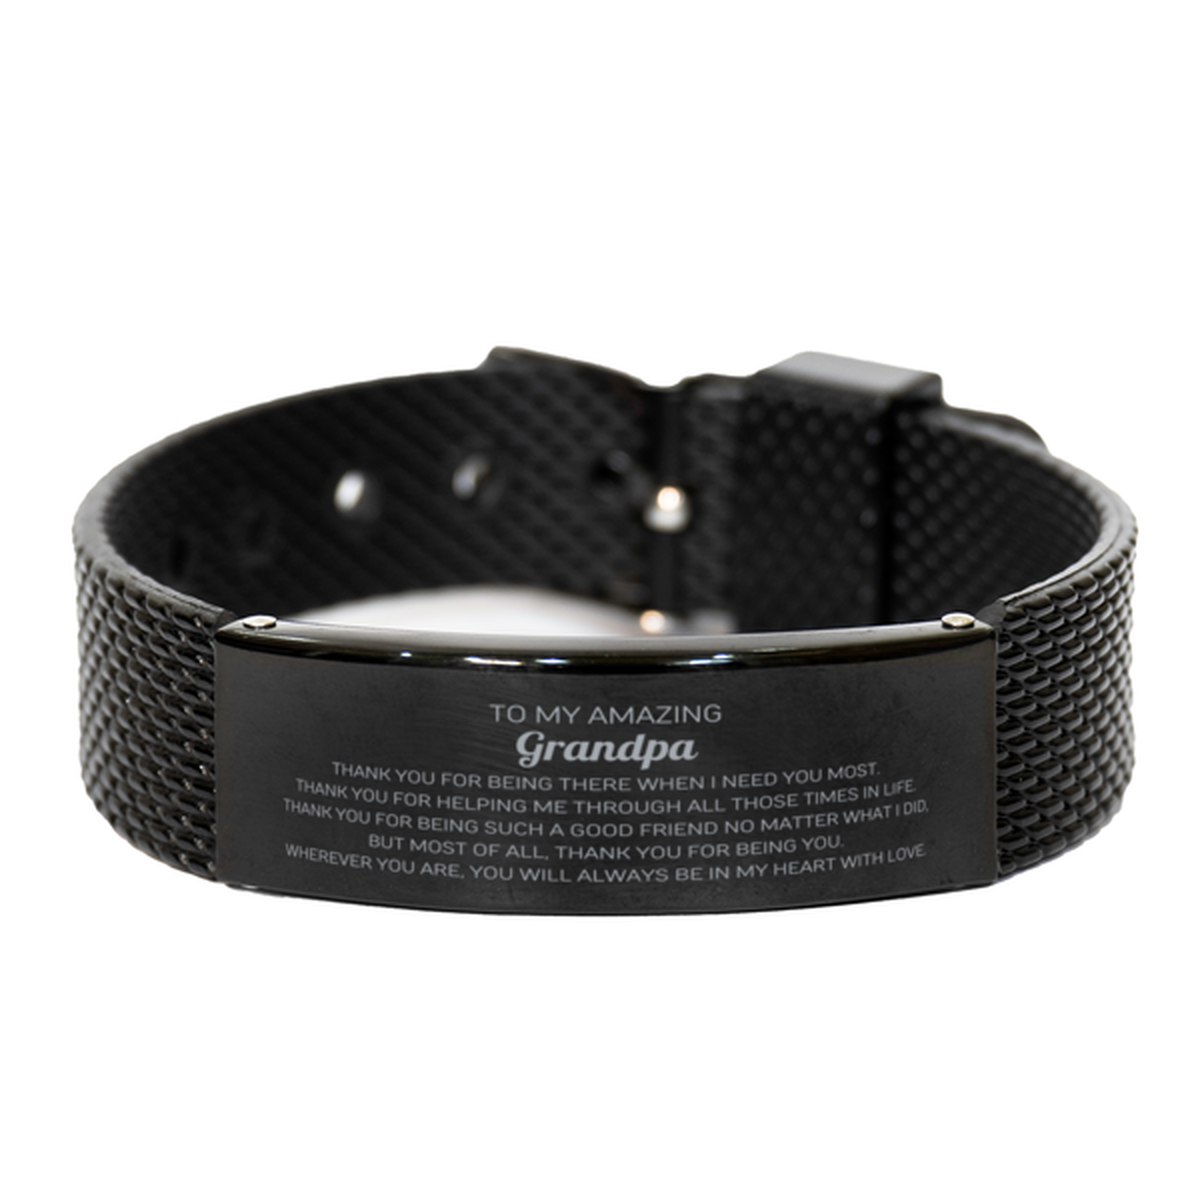 To My Amazing Grandpa Black Shark Mesh Bracelet, Thank you for being there, Thank You Gifts For Grandpa, Birthday, Christmas Unique Gifts For Grandpa